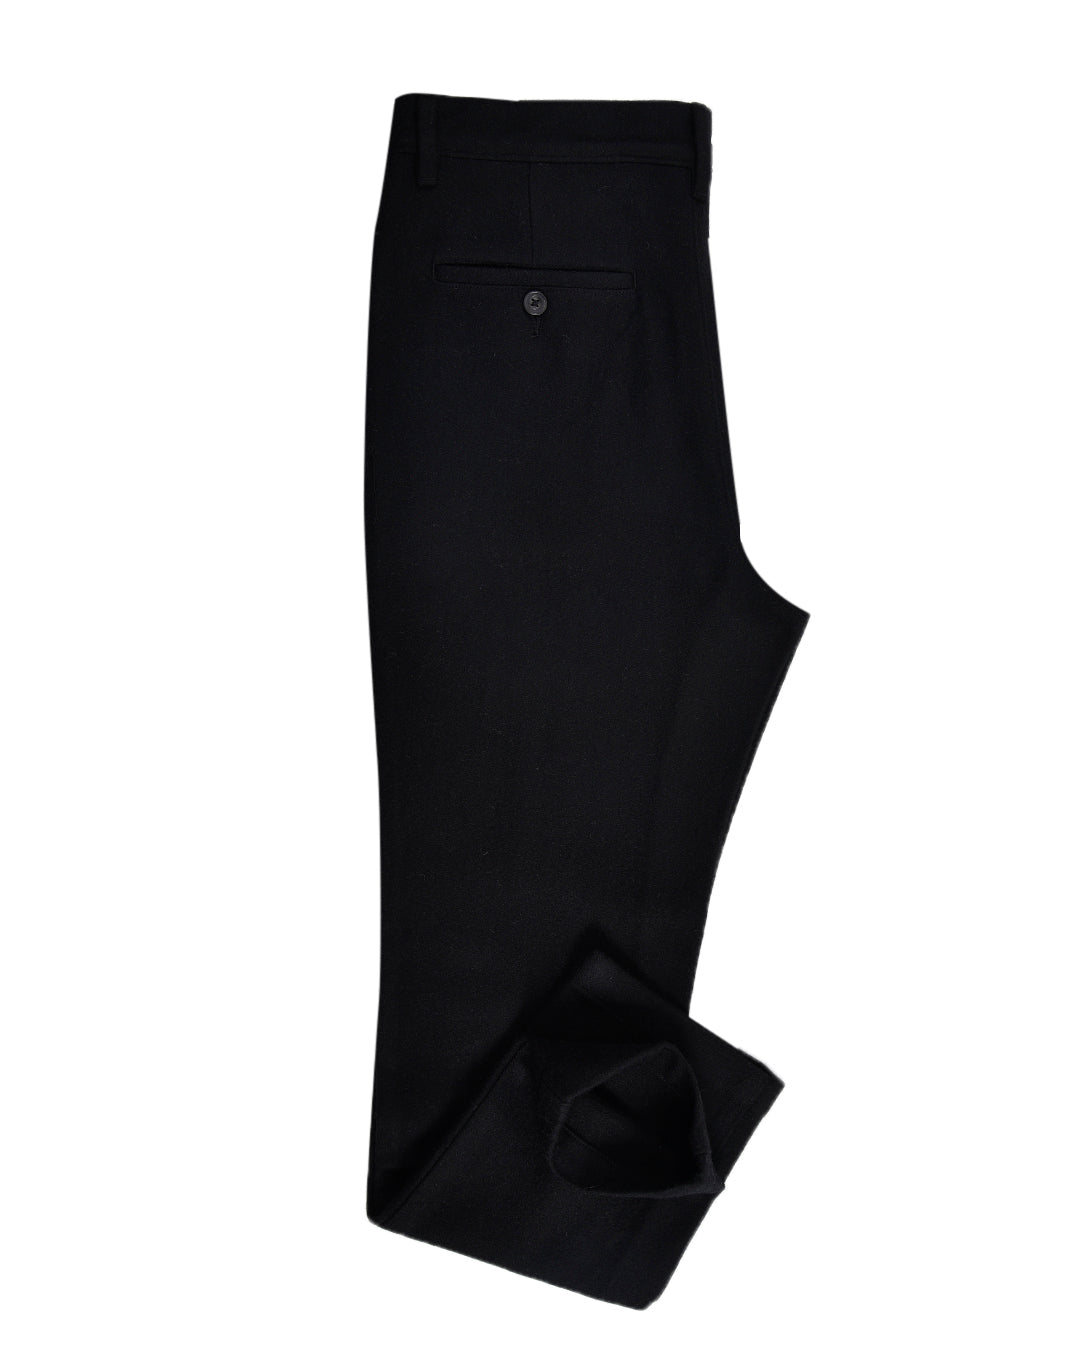 Black Winter Pant in Recycled Wool